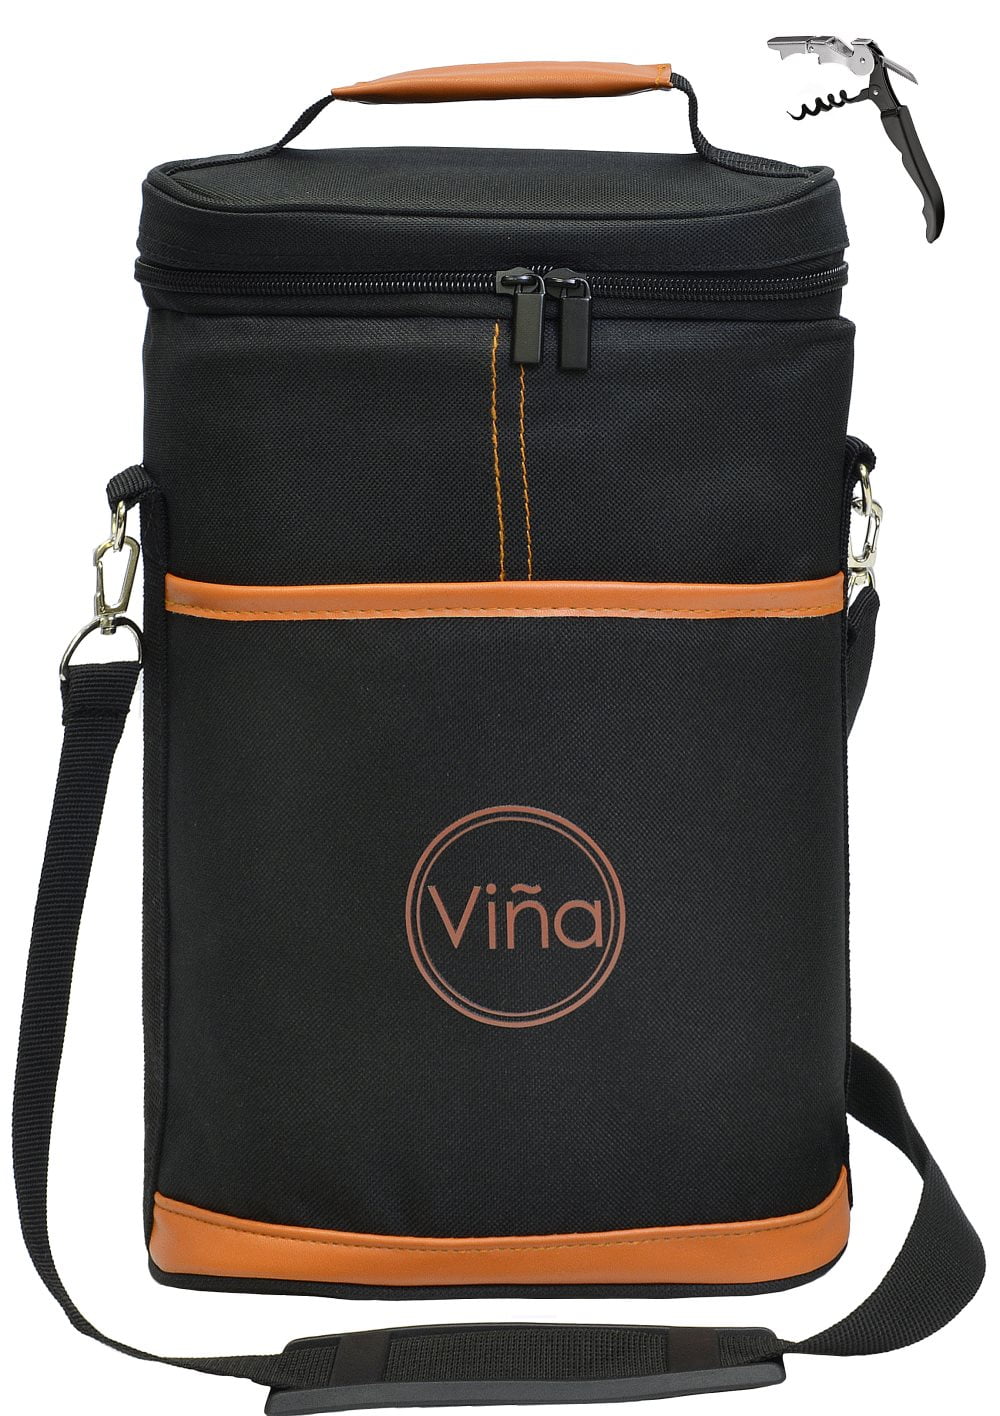 Vina 2-bottle Wine Carrier Bag Champagne Carrying Tote Bags Picnic Cooler Insulated Travel Wine ...